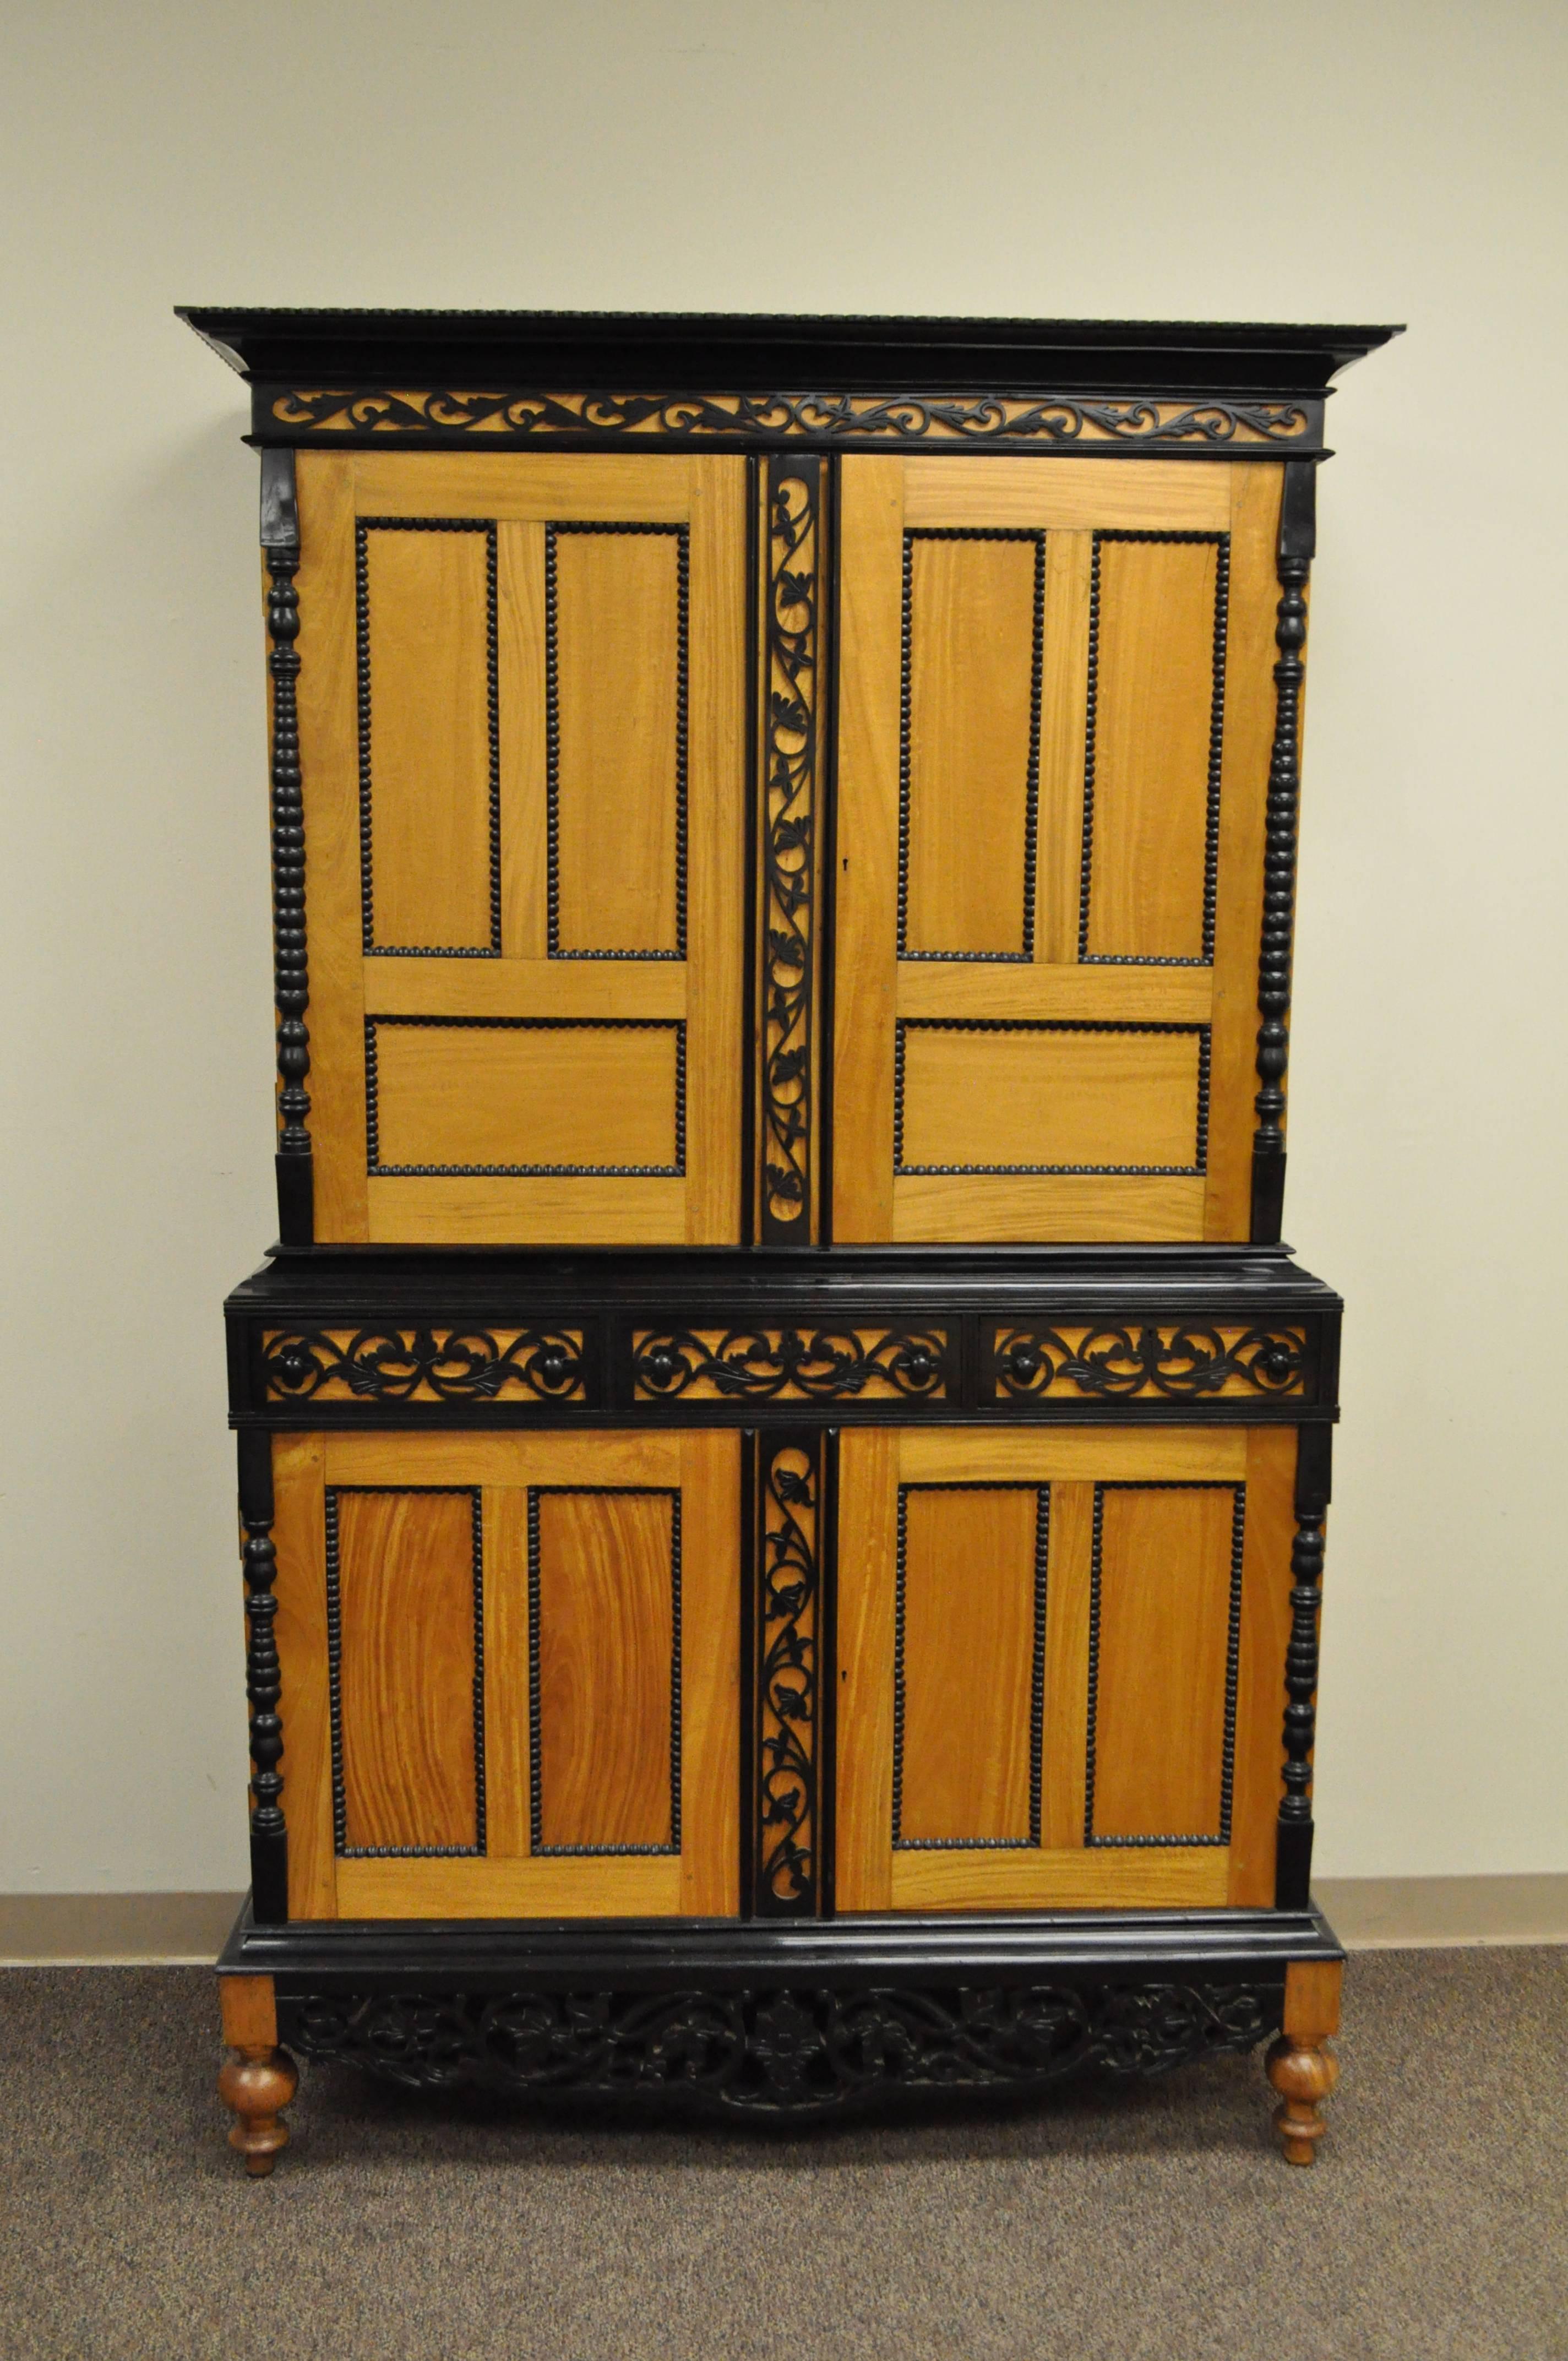 20th Century Indo Portuguese / Indo Dutch Colonial style cupboard cabinet. Item features beautiful satinwood, ebony, and mahogany wood, three dovetail constructed drawers, exposed pin joints, ornate pierced floral carved panels, three-part